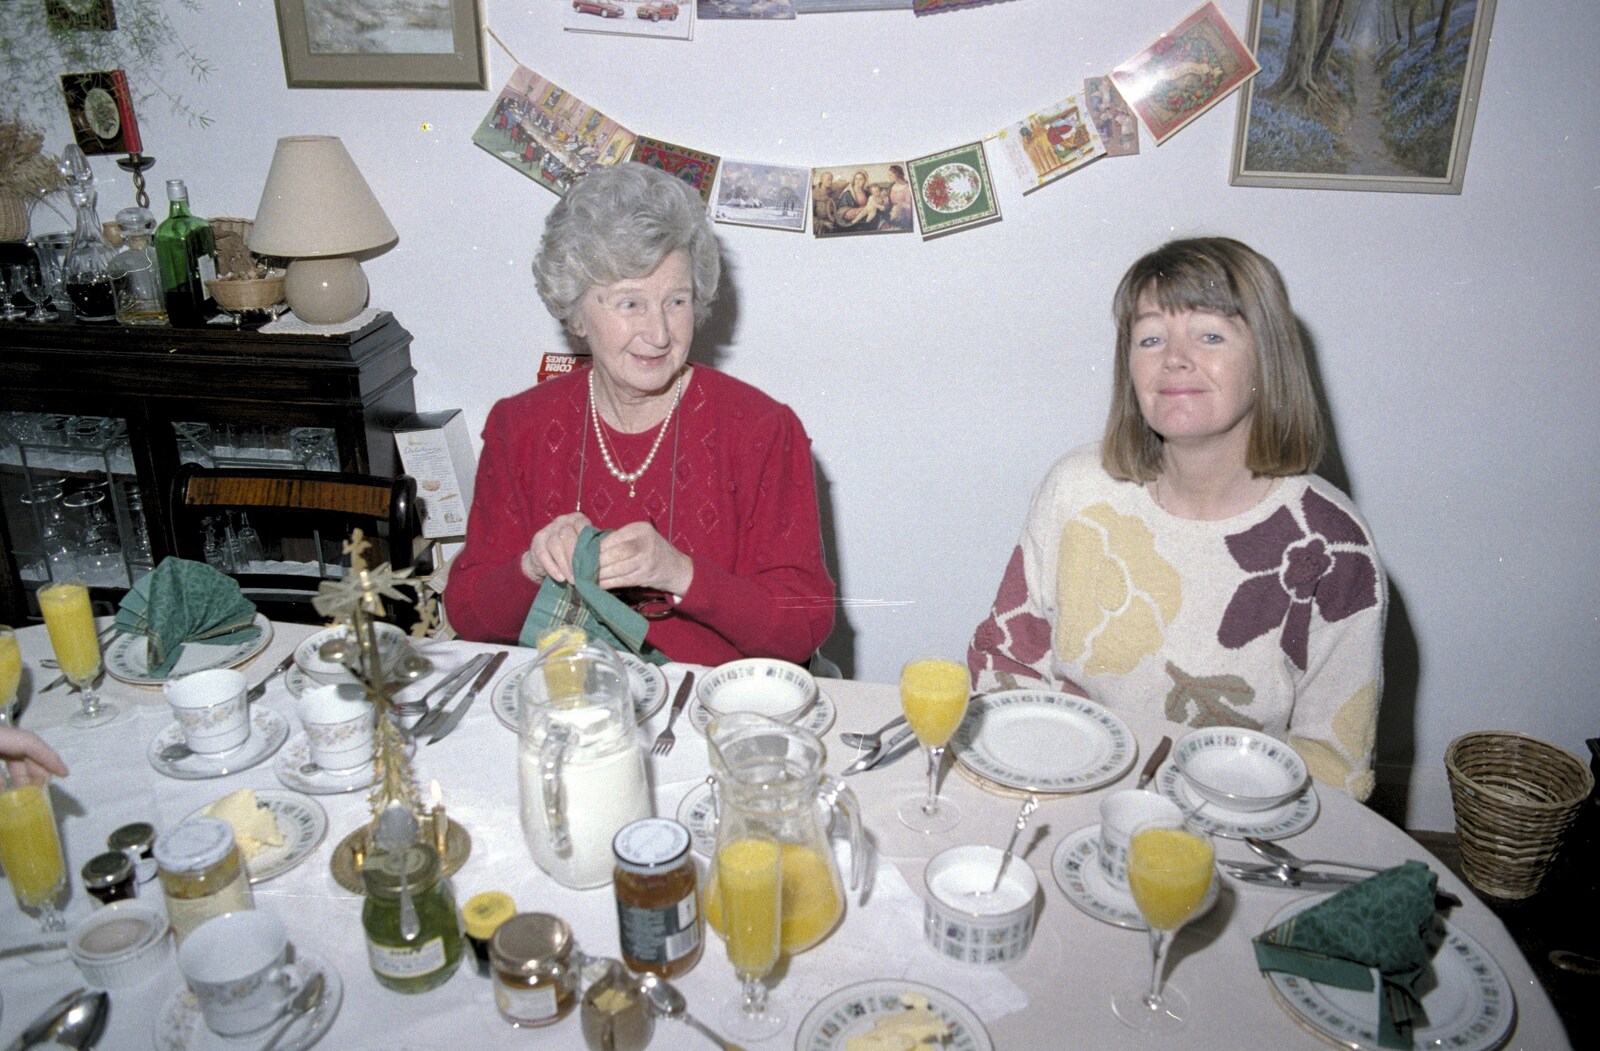 Grandmother and Mother from Christmas Down South, Burton and Walkford, Dorset - 25th December 1994